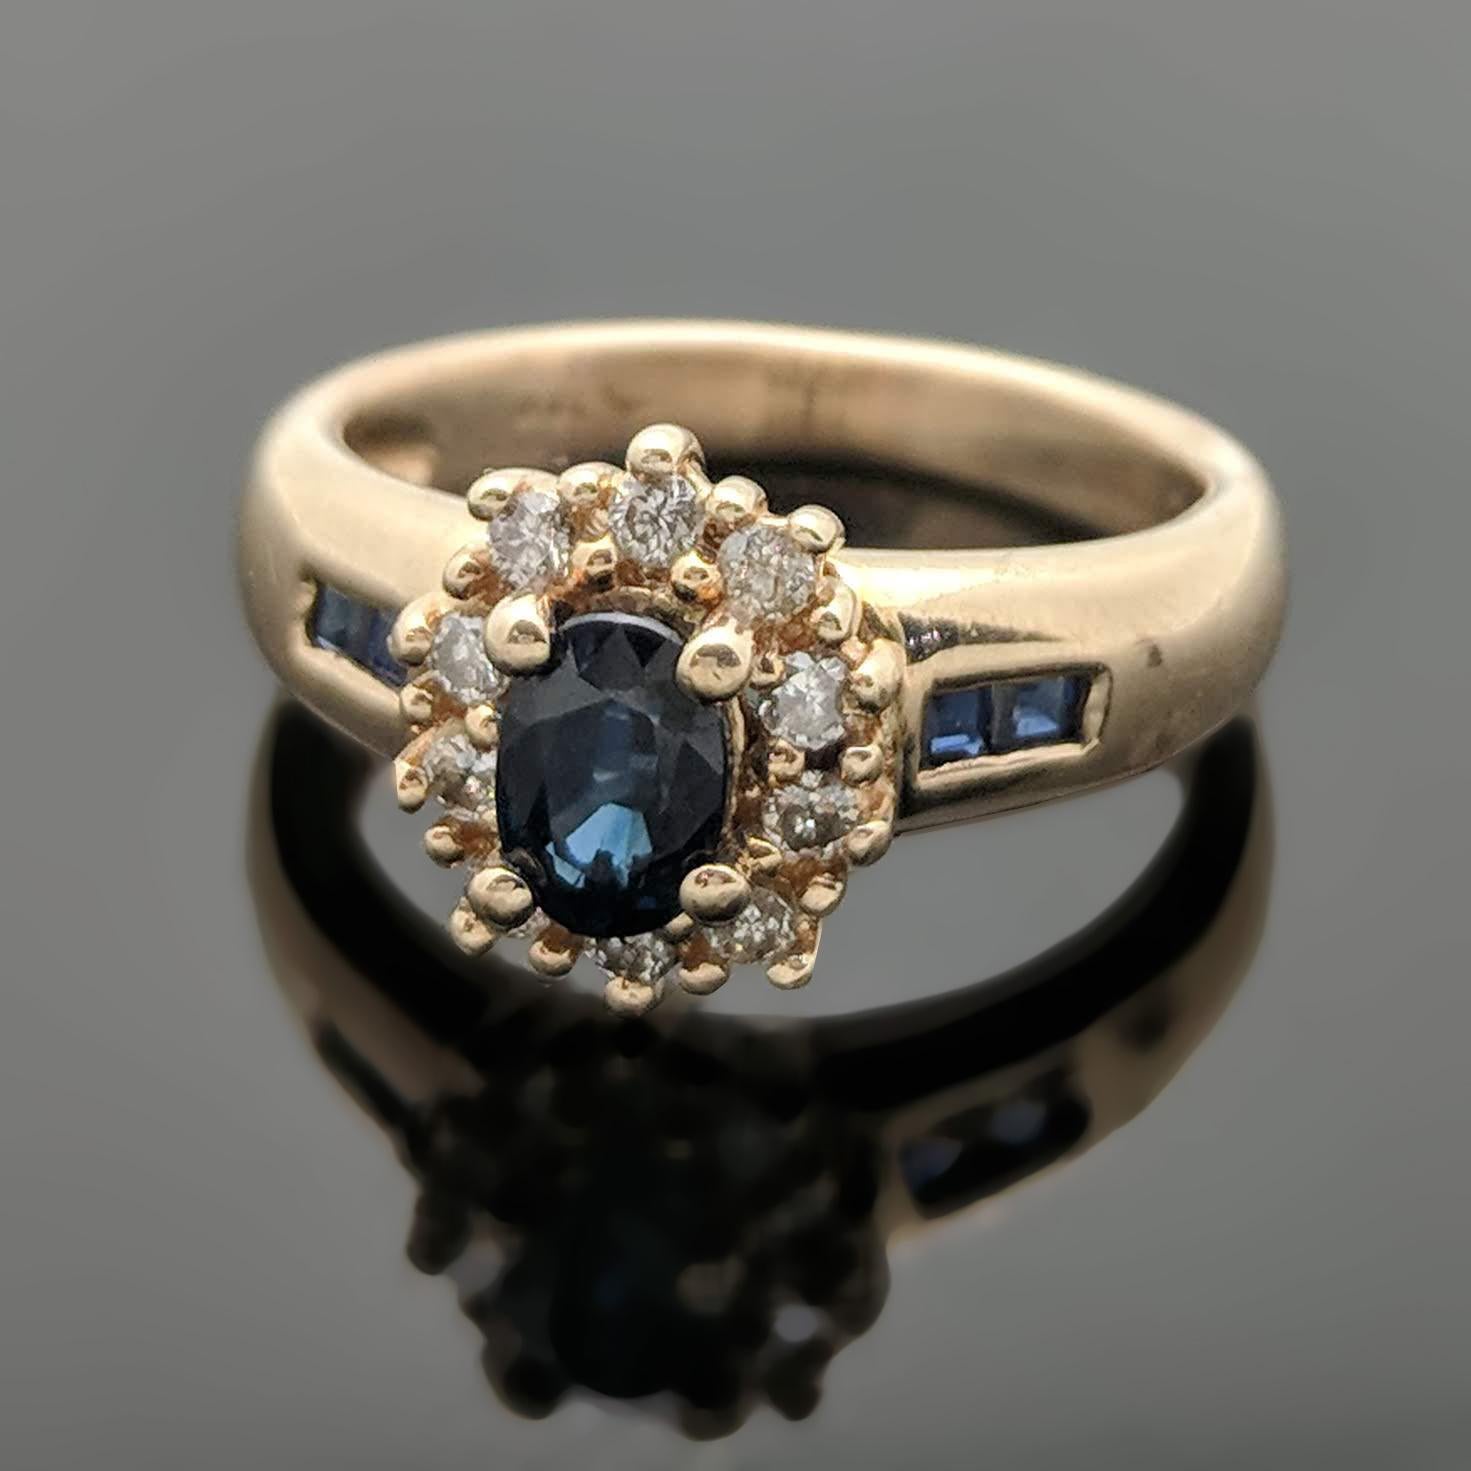 A vintage 14kt yellow gold ring featuring a center oval blue sapphire with an estimated weight of 0.58ct, side sapphires at an estimated 0.12 cttw and round brilliant-cut diamonds at an estimated 0.10 cttw. Estimated weight of gold is 3.5 gr. 

We